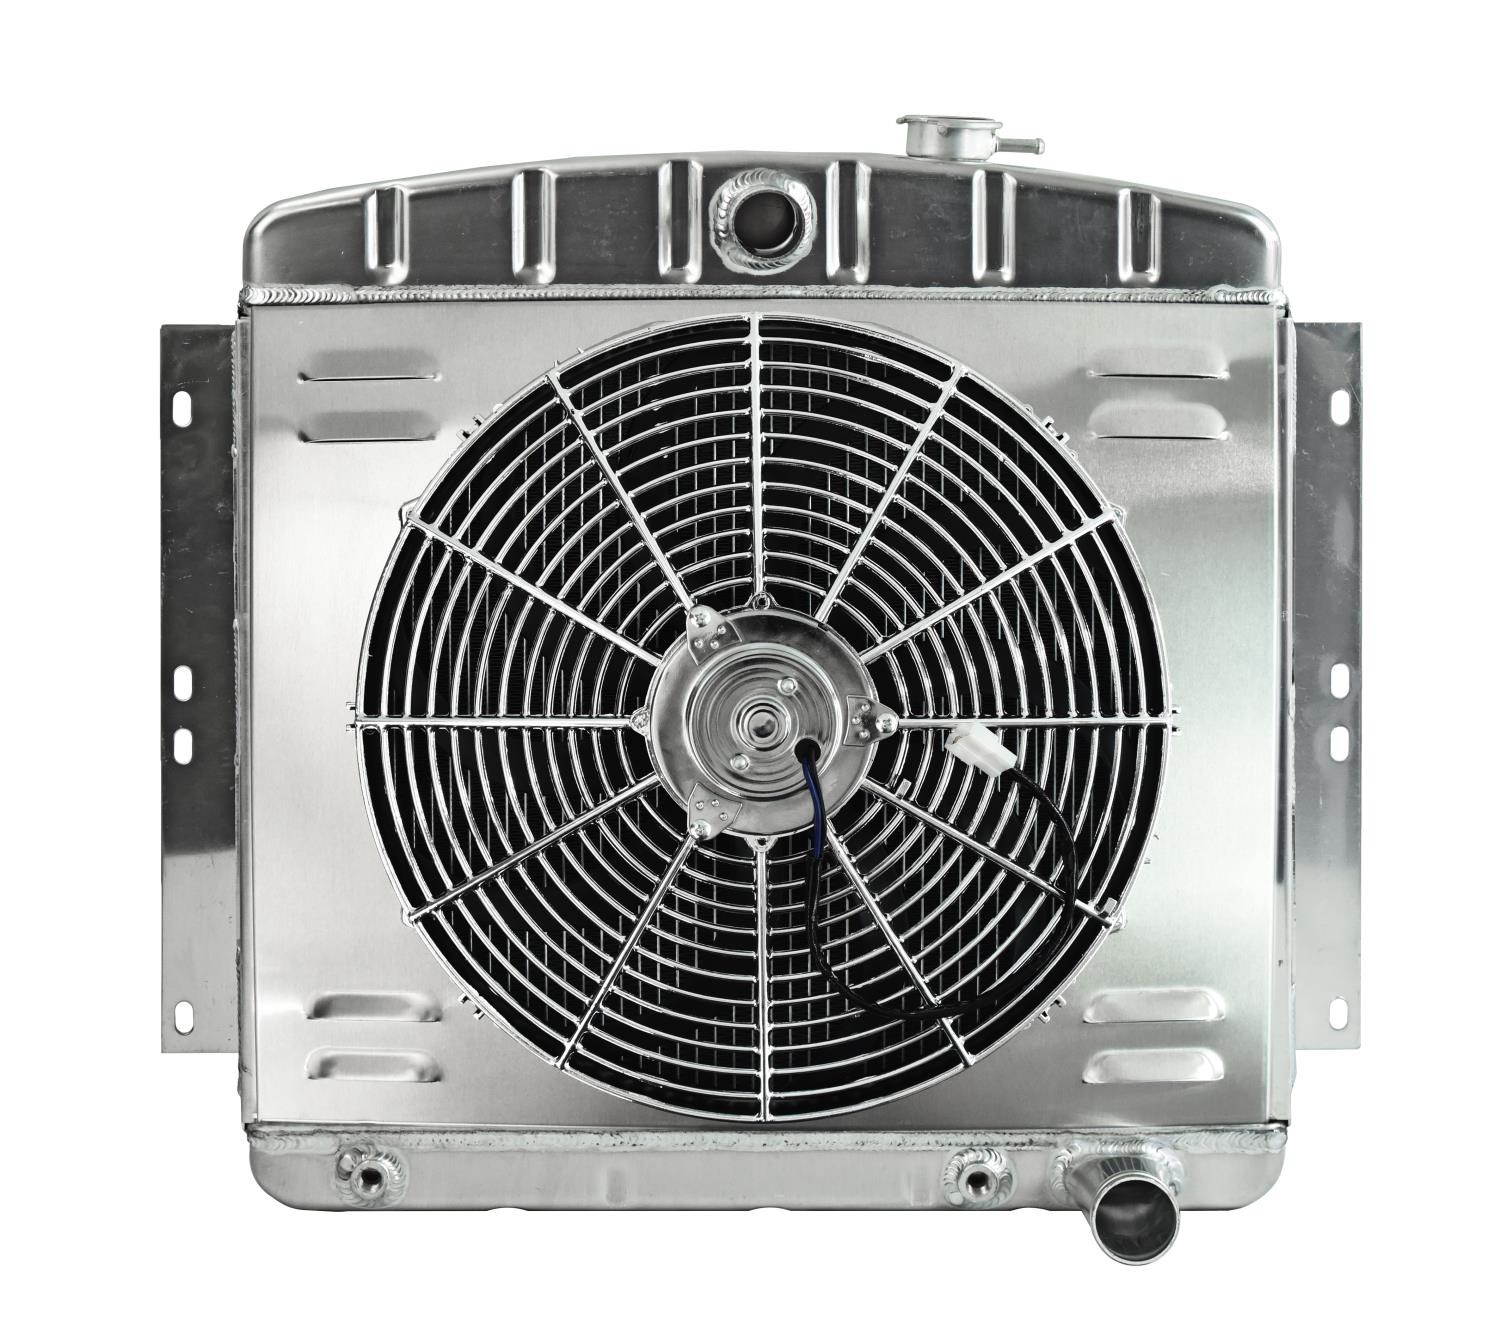 Aluminum Radiator & Fan Combo for Select 1949-1954 Chevrolet Models w/ Chevy V8 Engine Conversion [16 in. Fan]